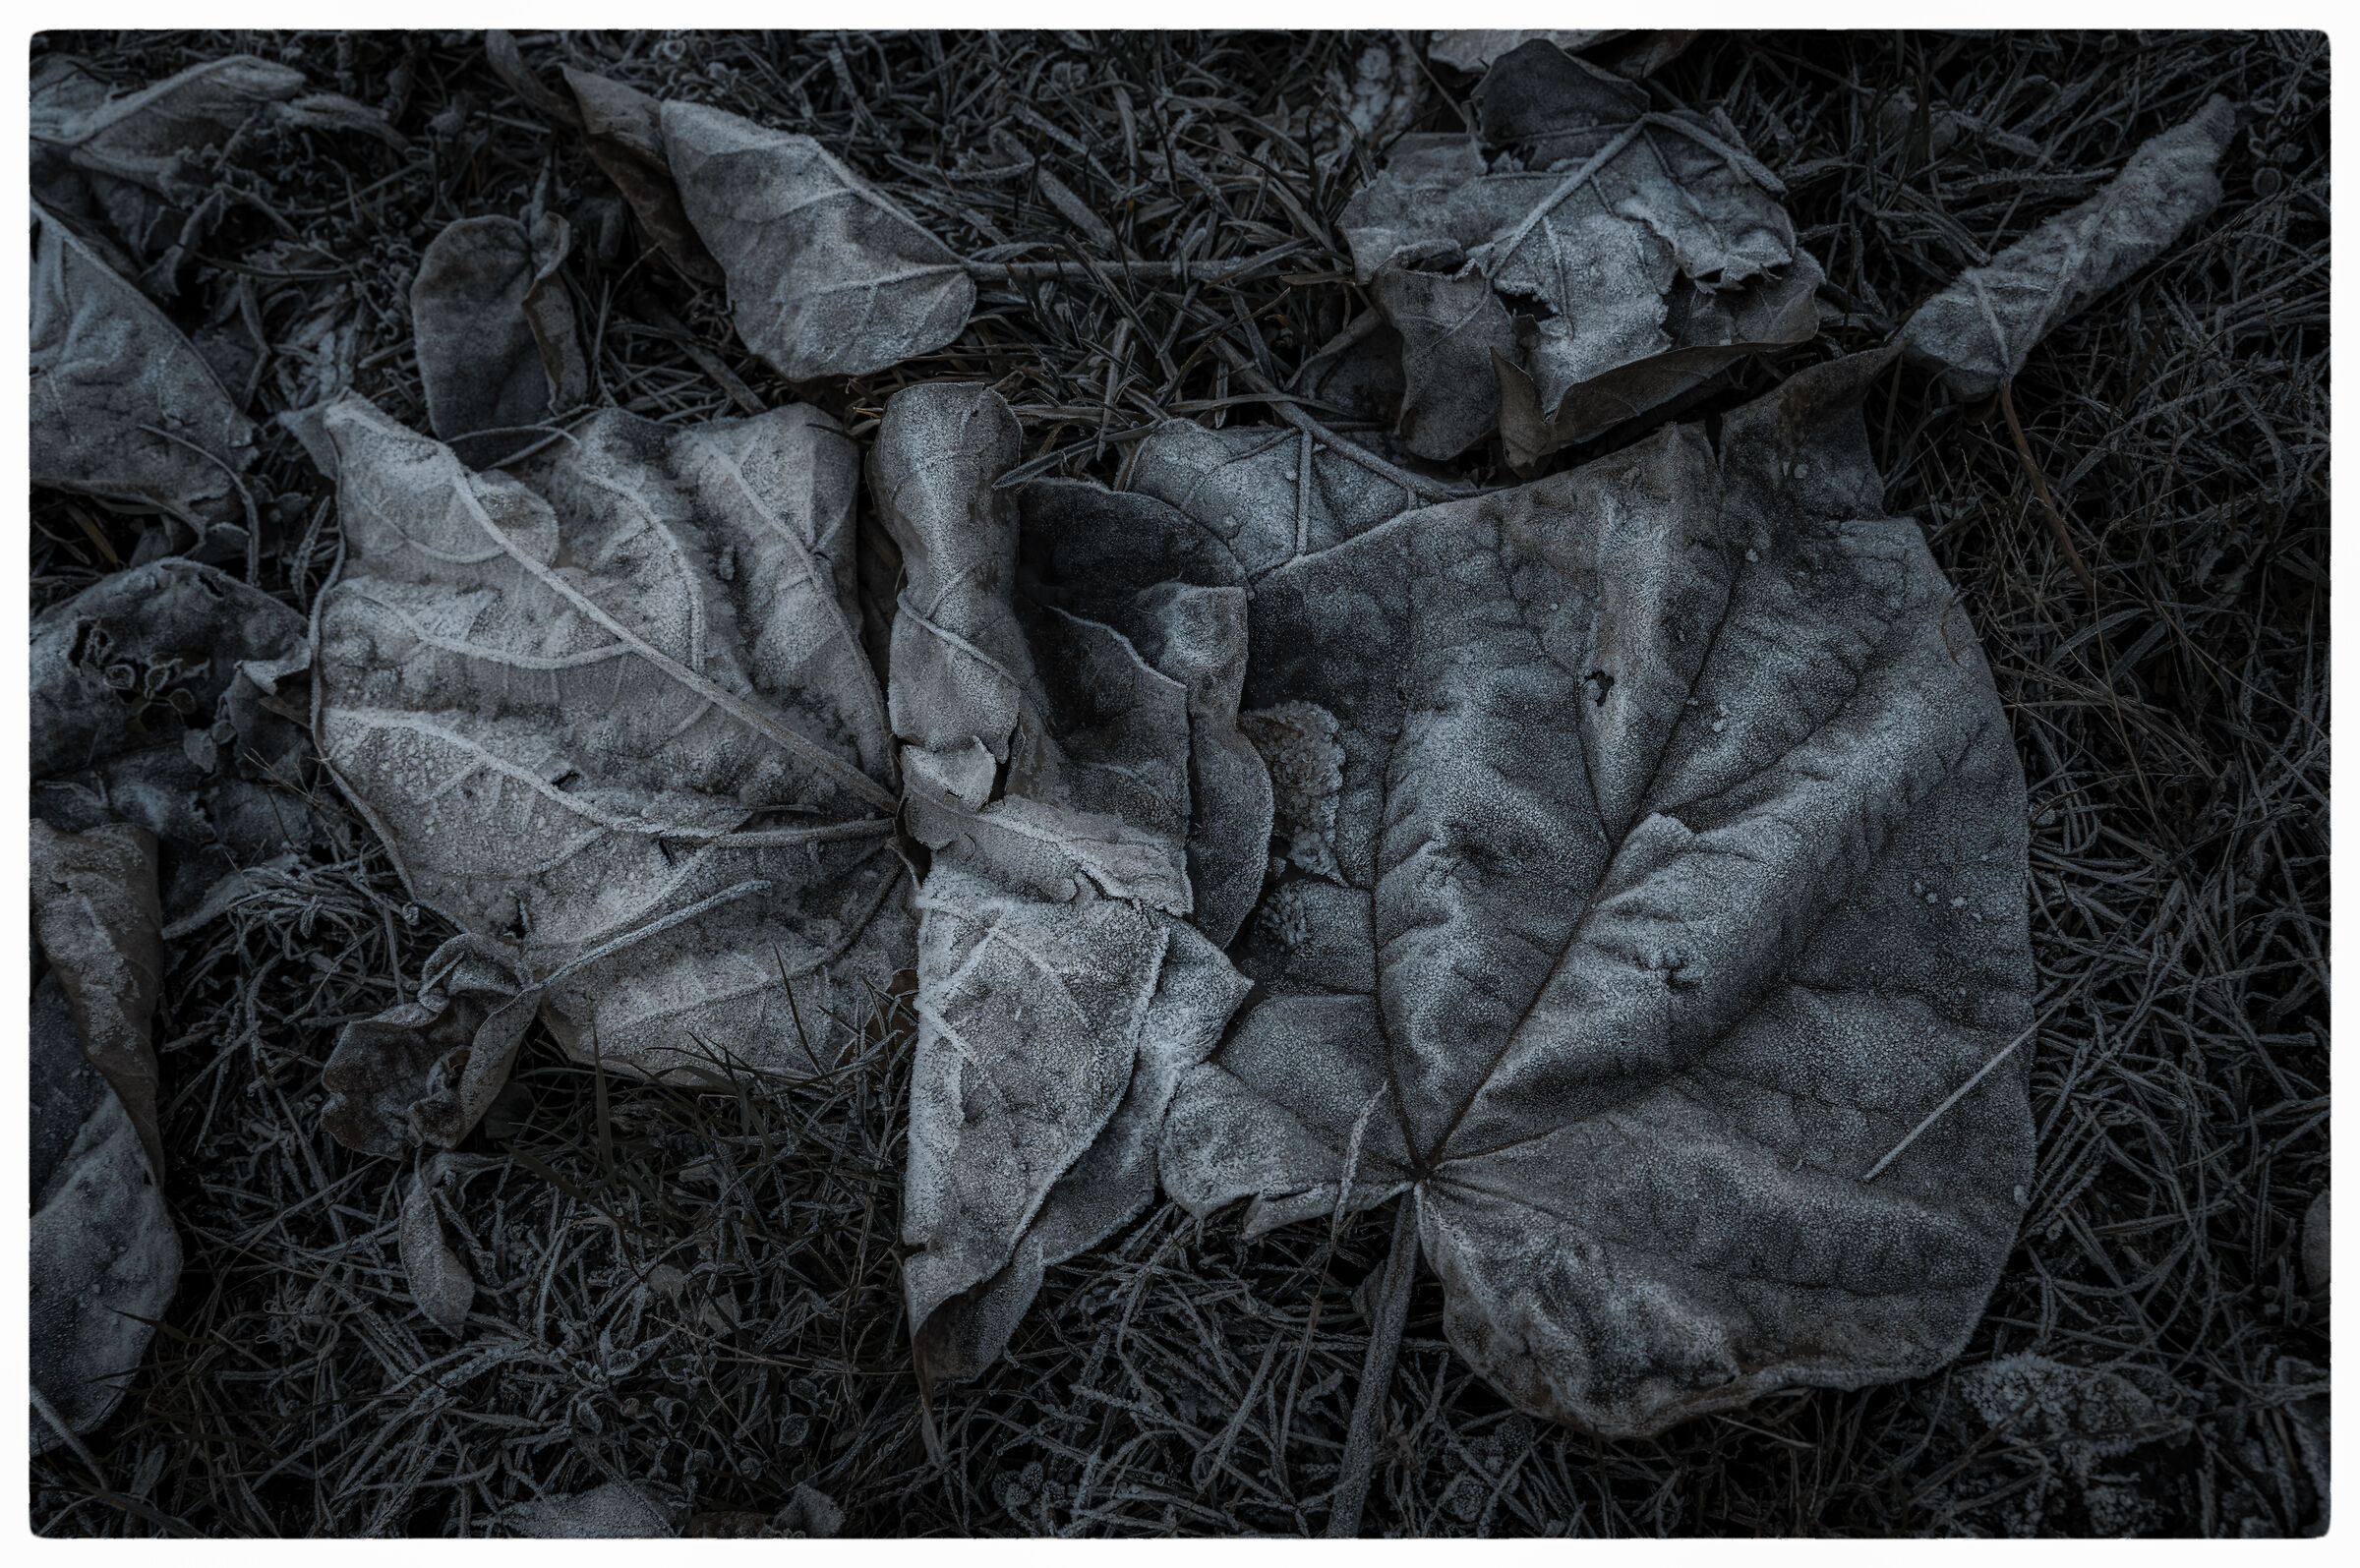 Sycamore leaves...